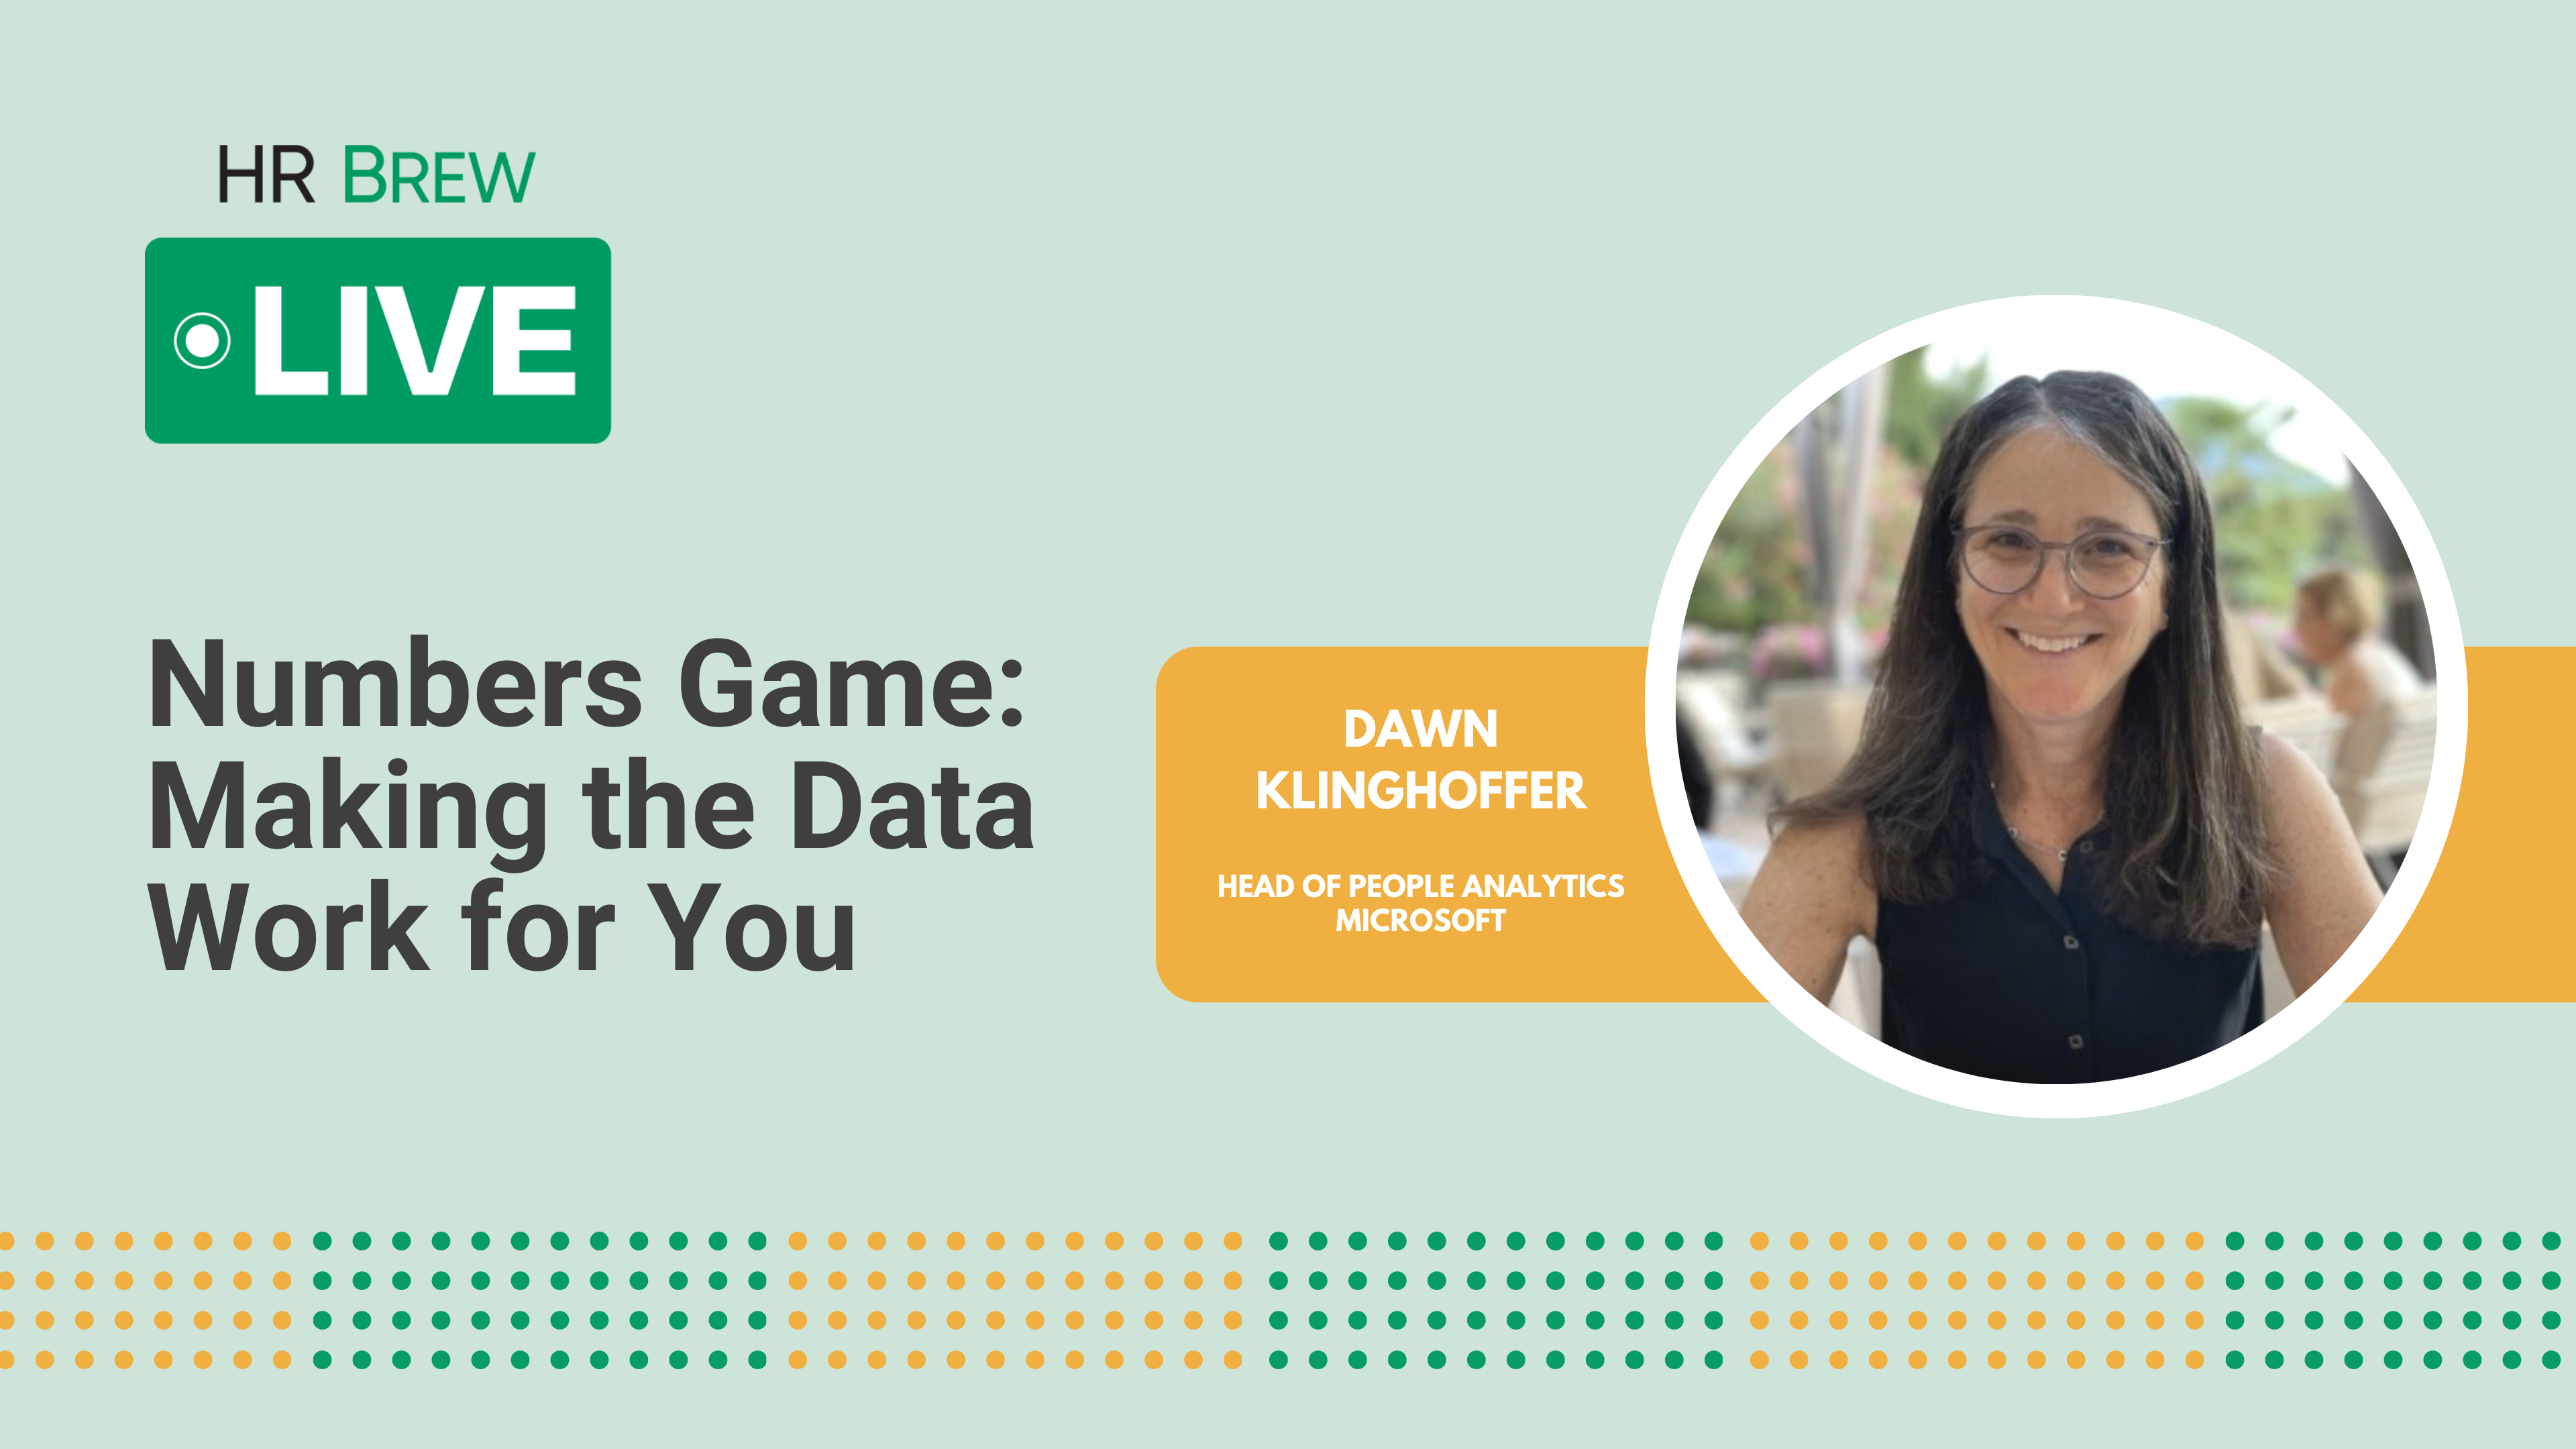 HR Brew event "Numbers Game: Making the Data Work for You" featuring Dawn Klinghoffer